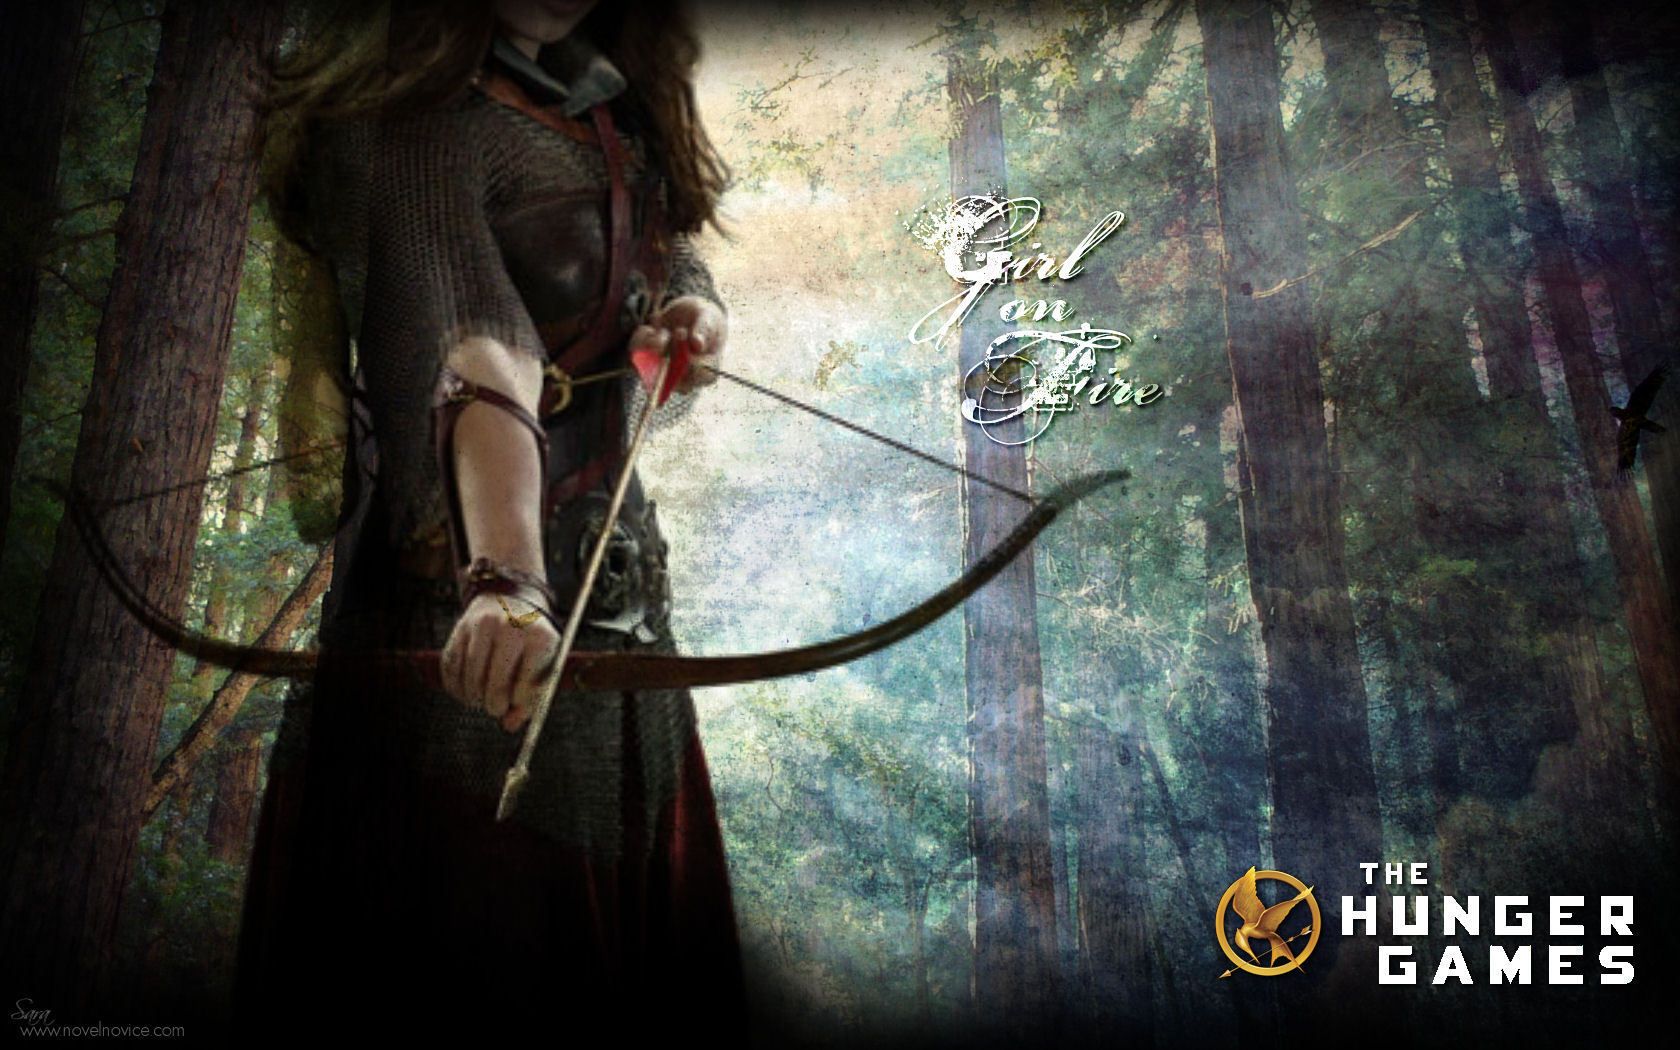 The Hunger Games Wallpapers - The Hunger Games Wallpaper